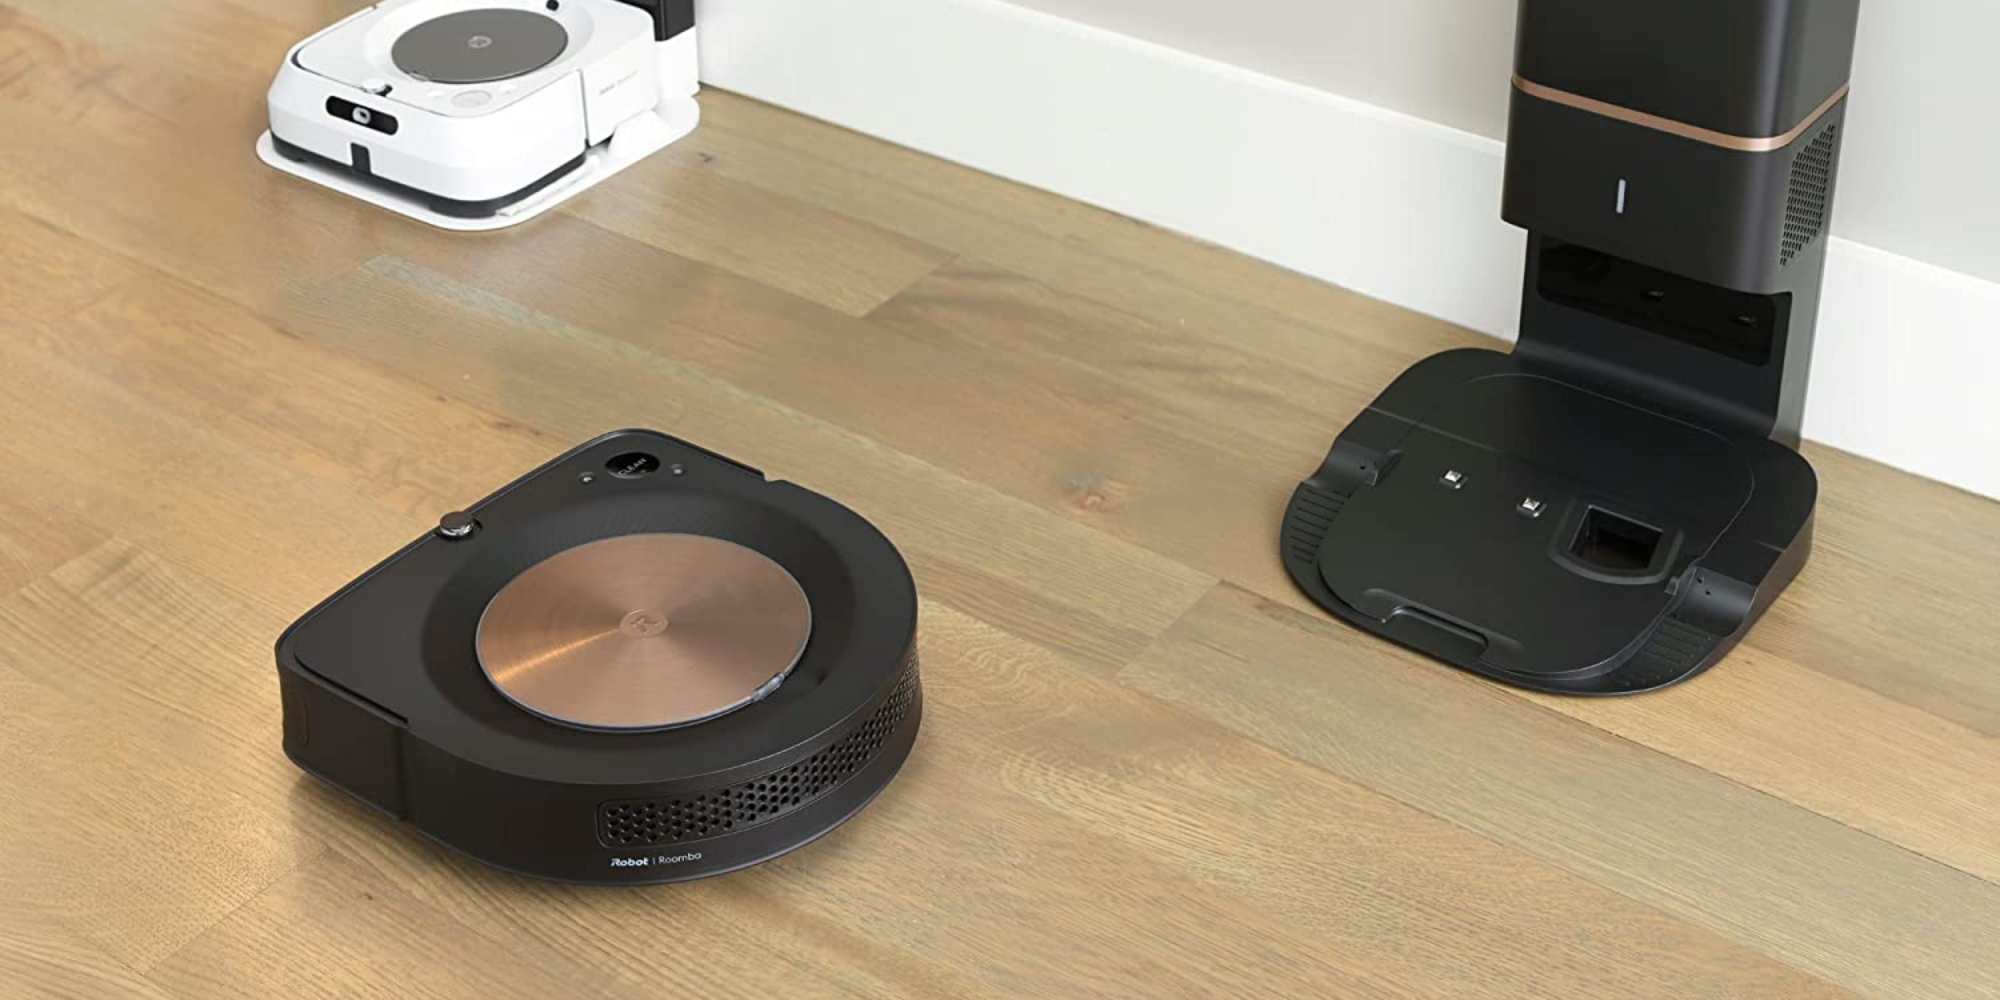 Get the iRobot Braava Jet m6 for just $300 on